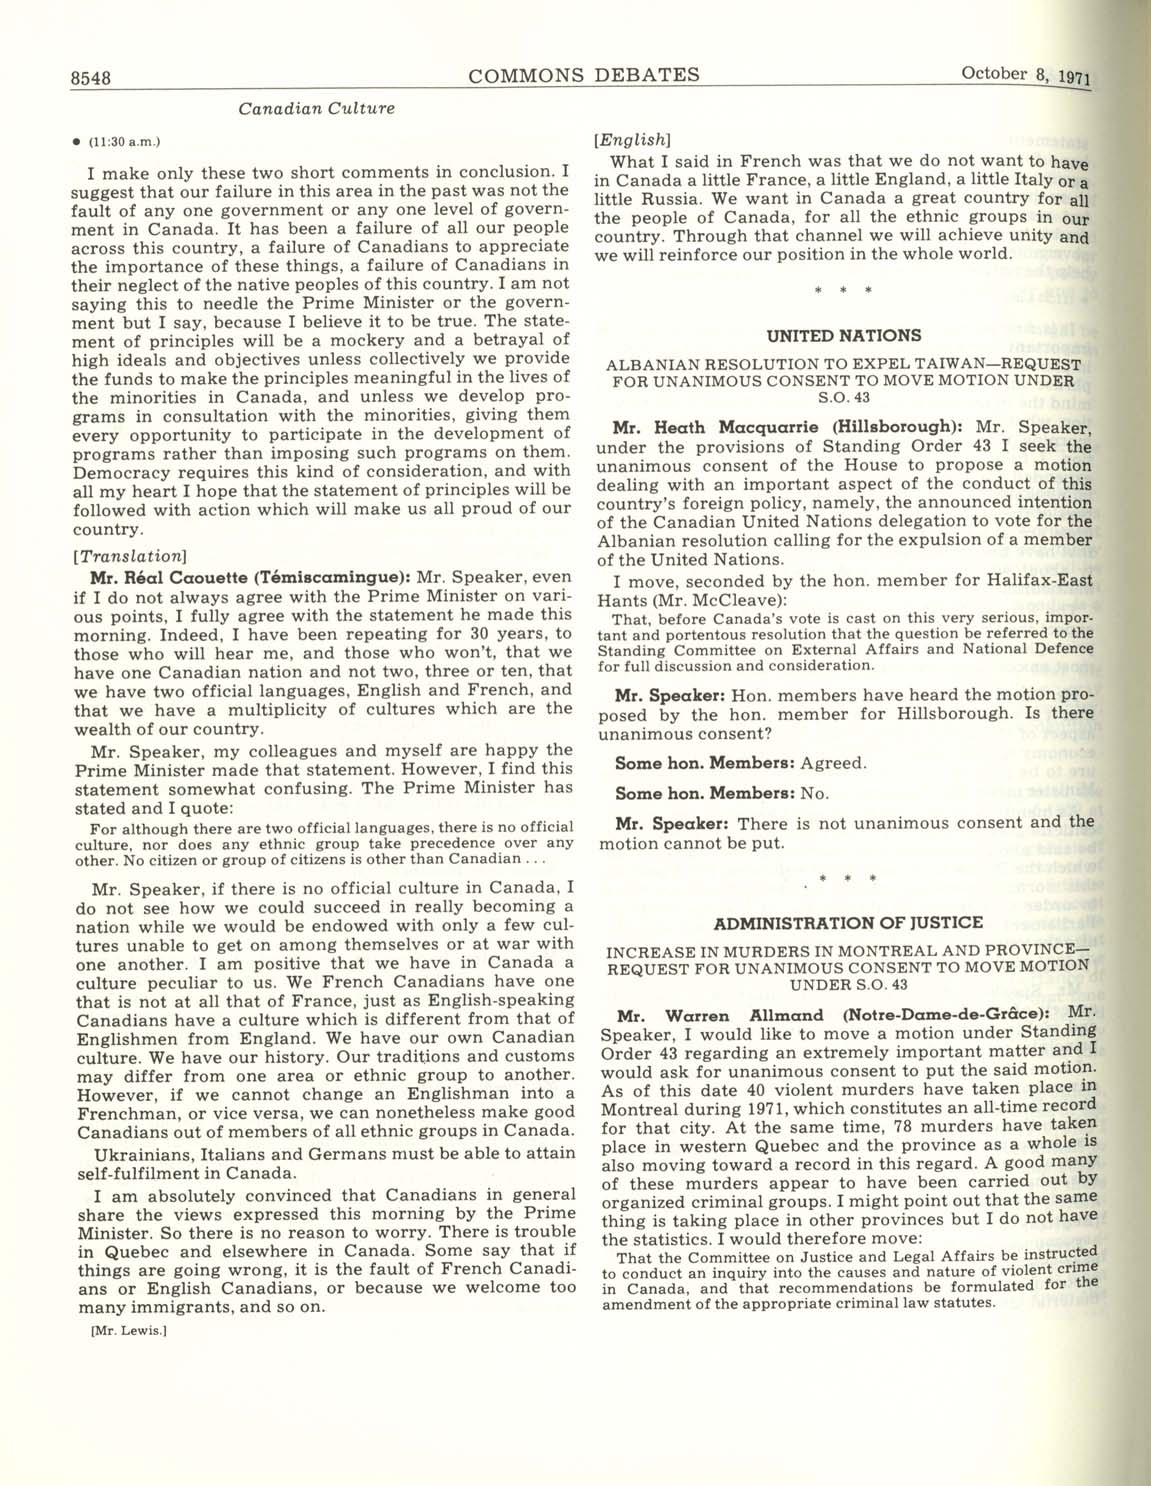 Page 8548 Canadian Multiculturalism Policy, 1971